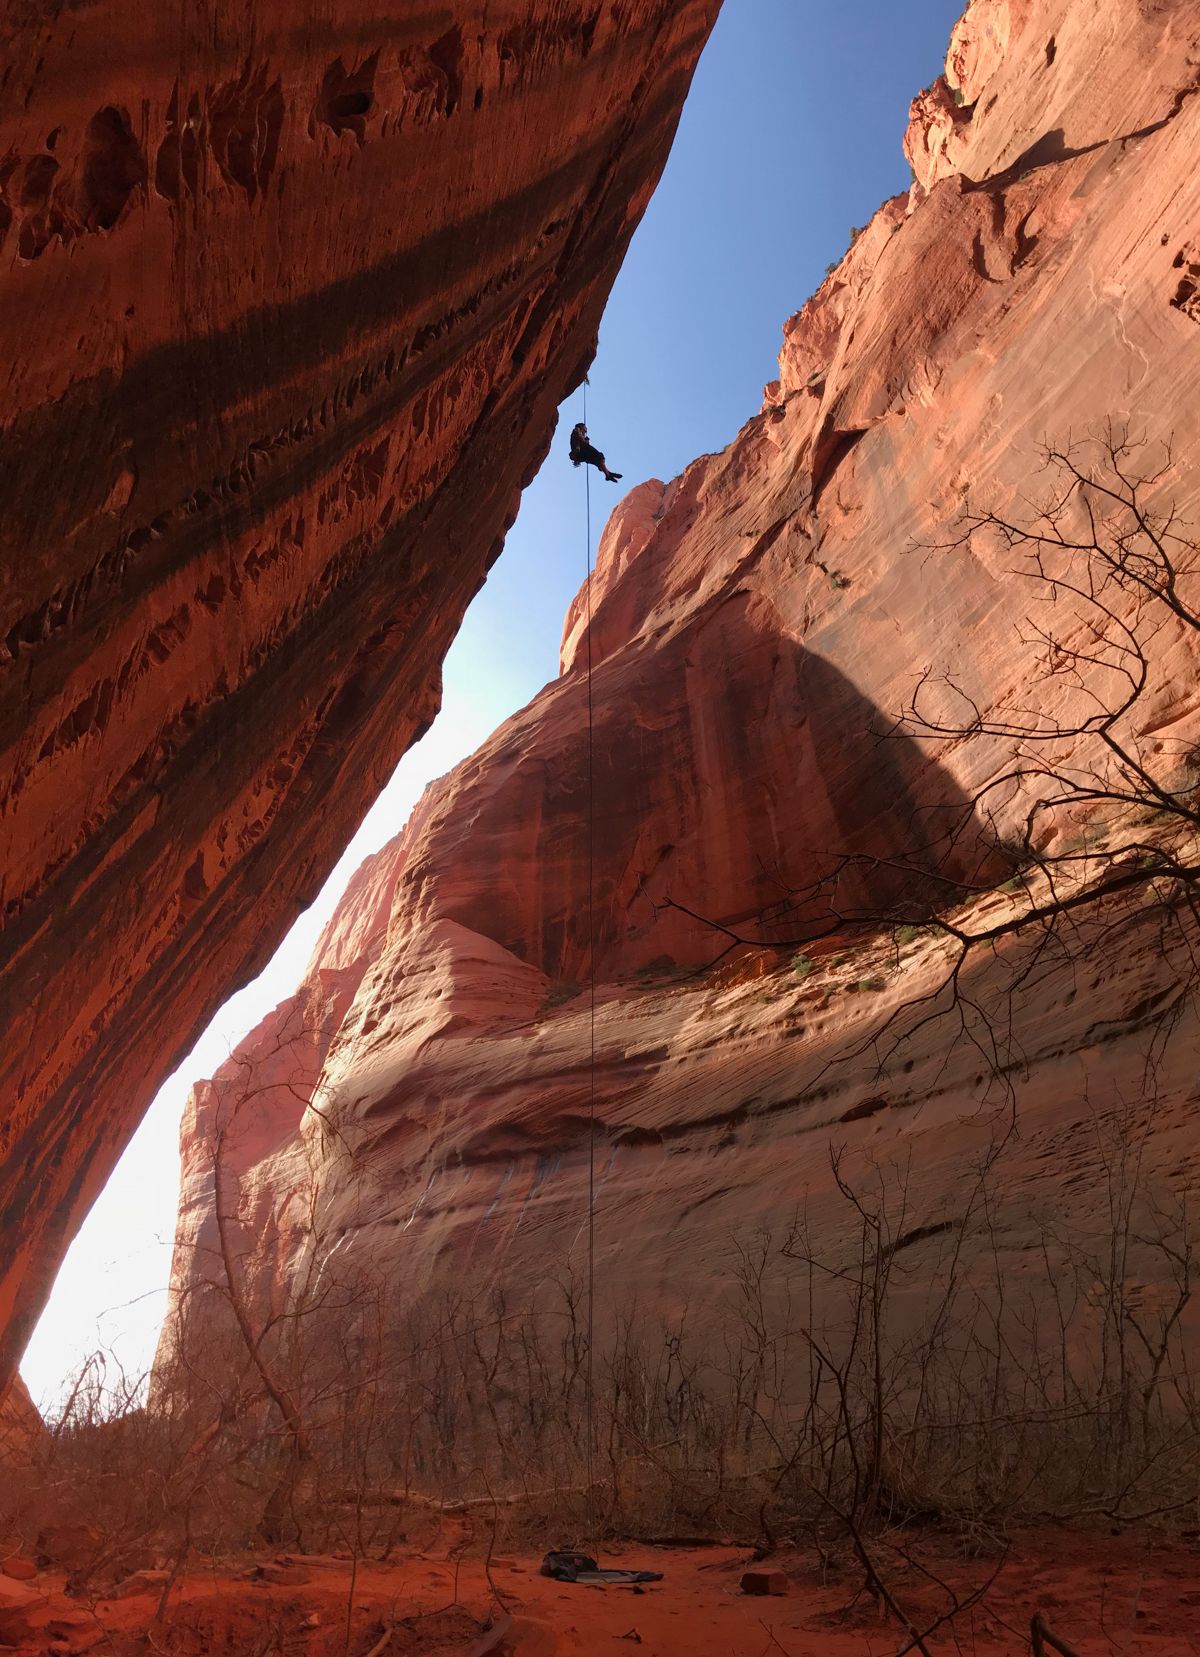 A climber abseils in a canyon of desert sandstone